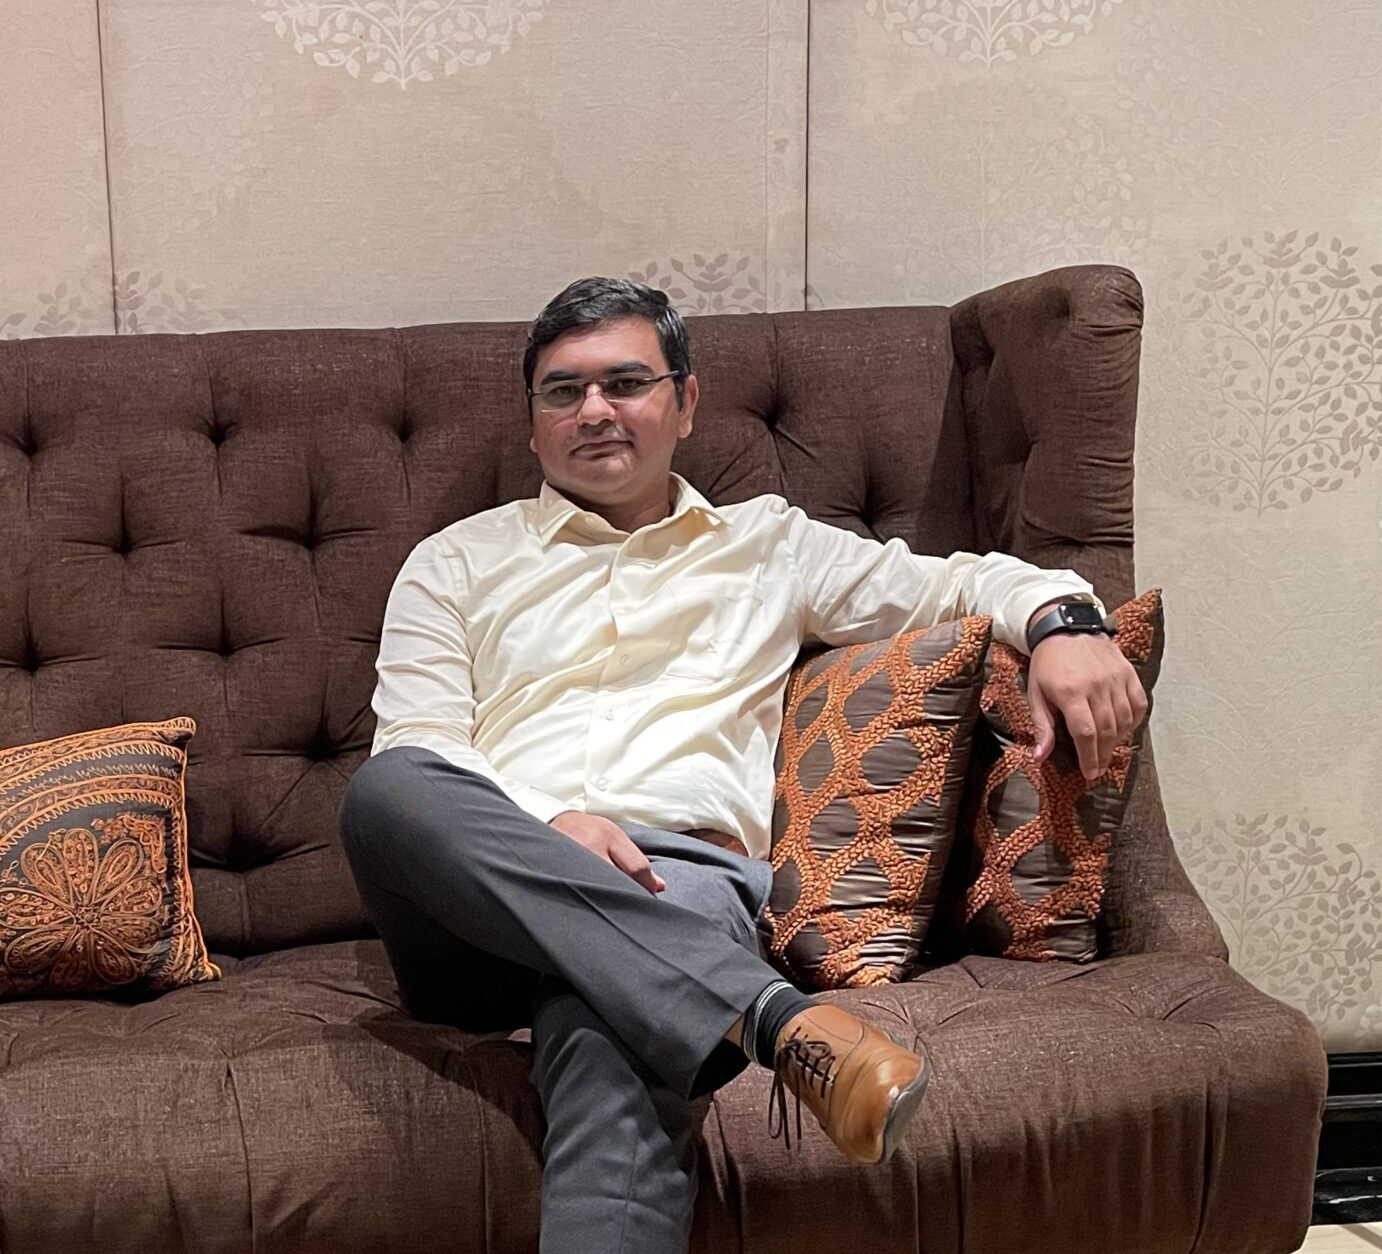 ‘Ecobillz today is adding 10 hospitality properties every month to its existing list’ : Dr. Ameet Patil, Founder & CEO of Ecobillz Private Limited